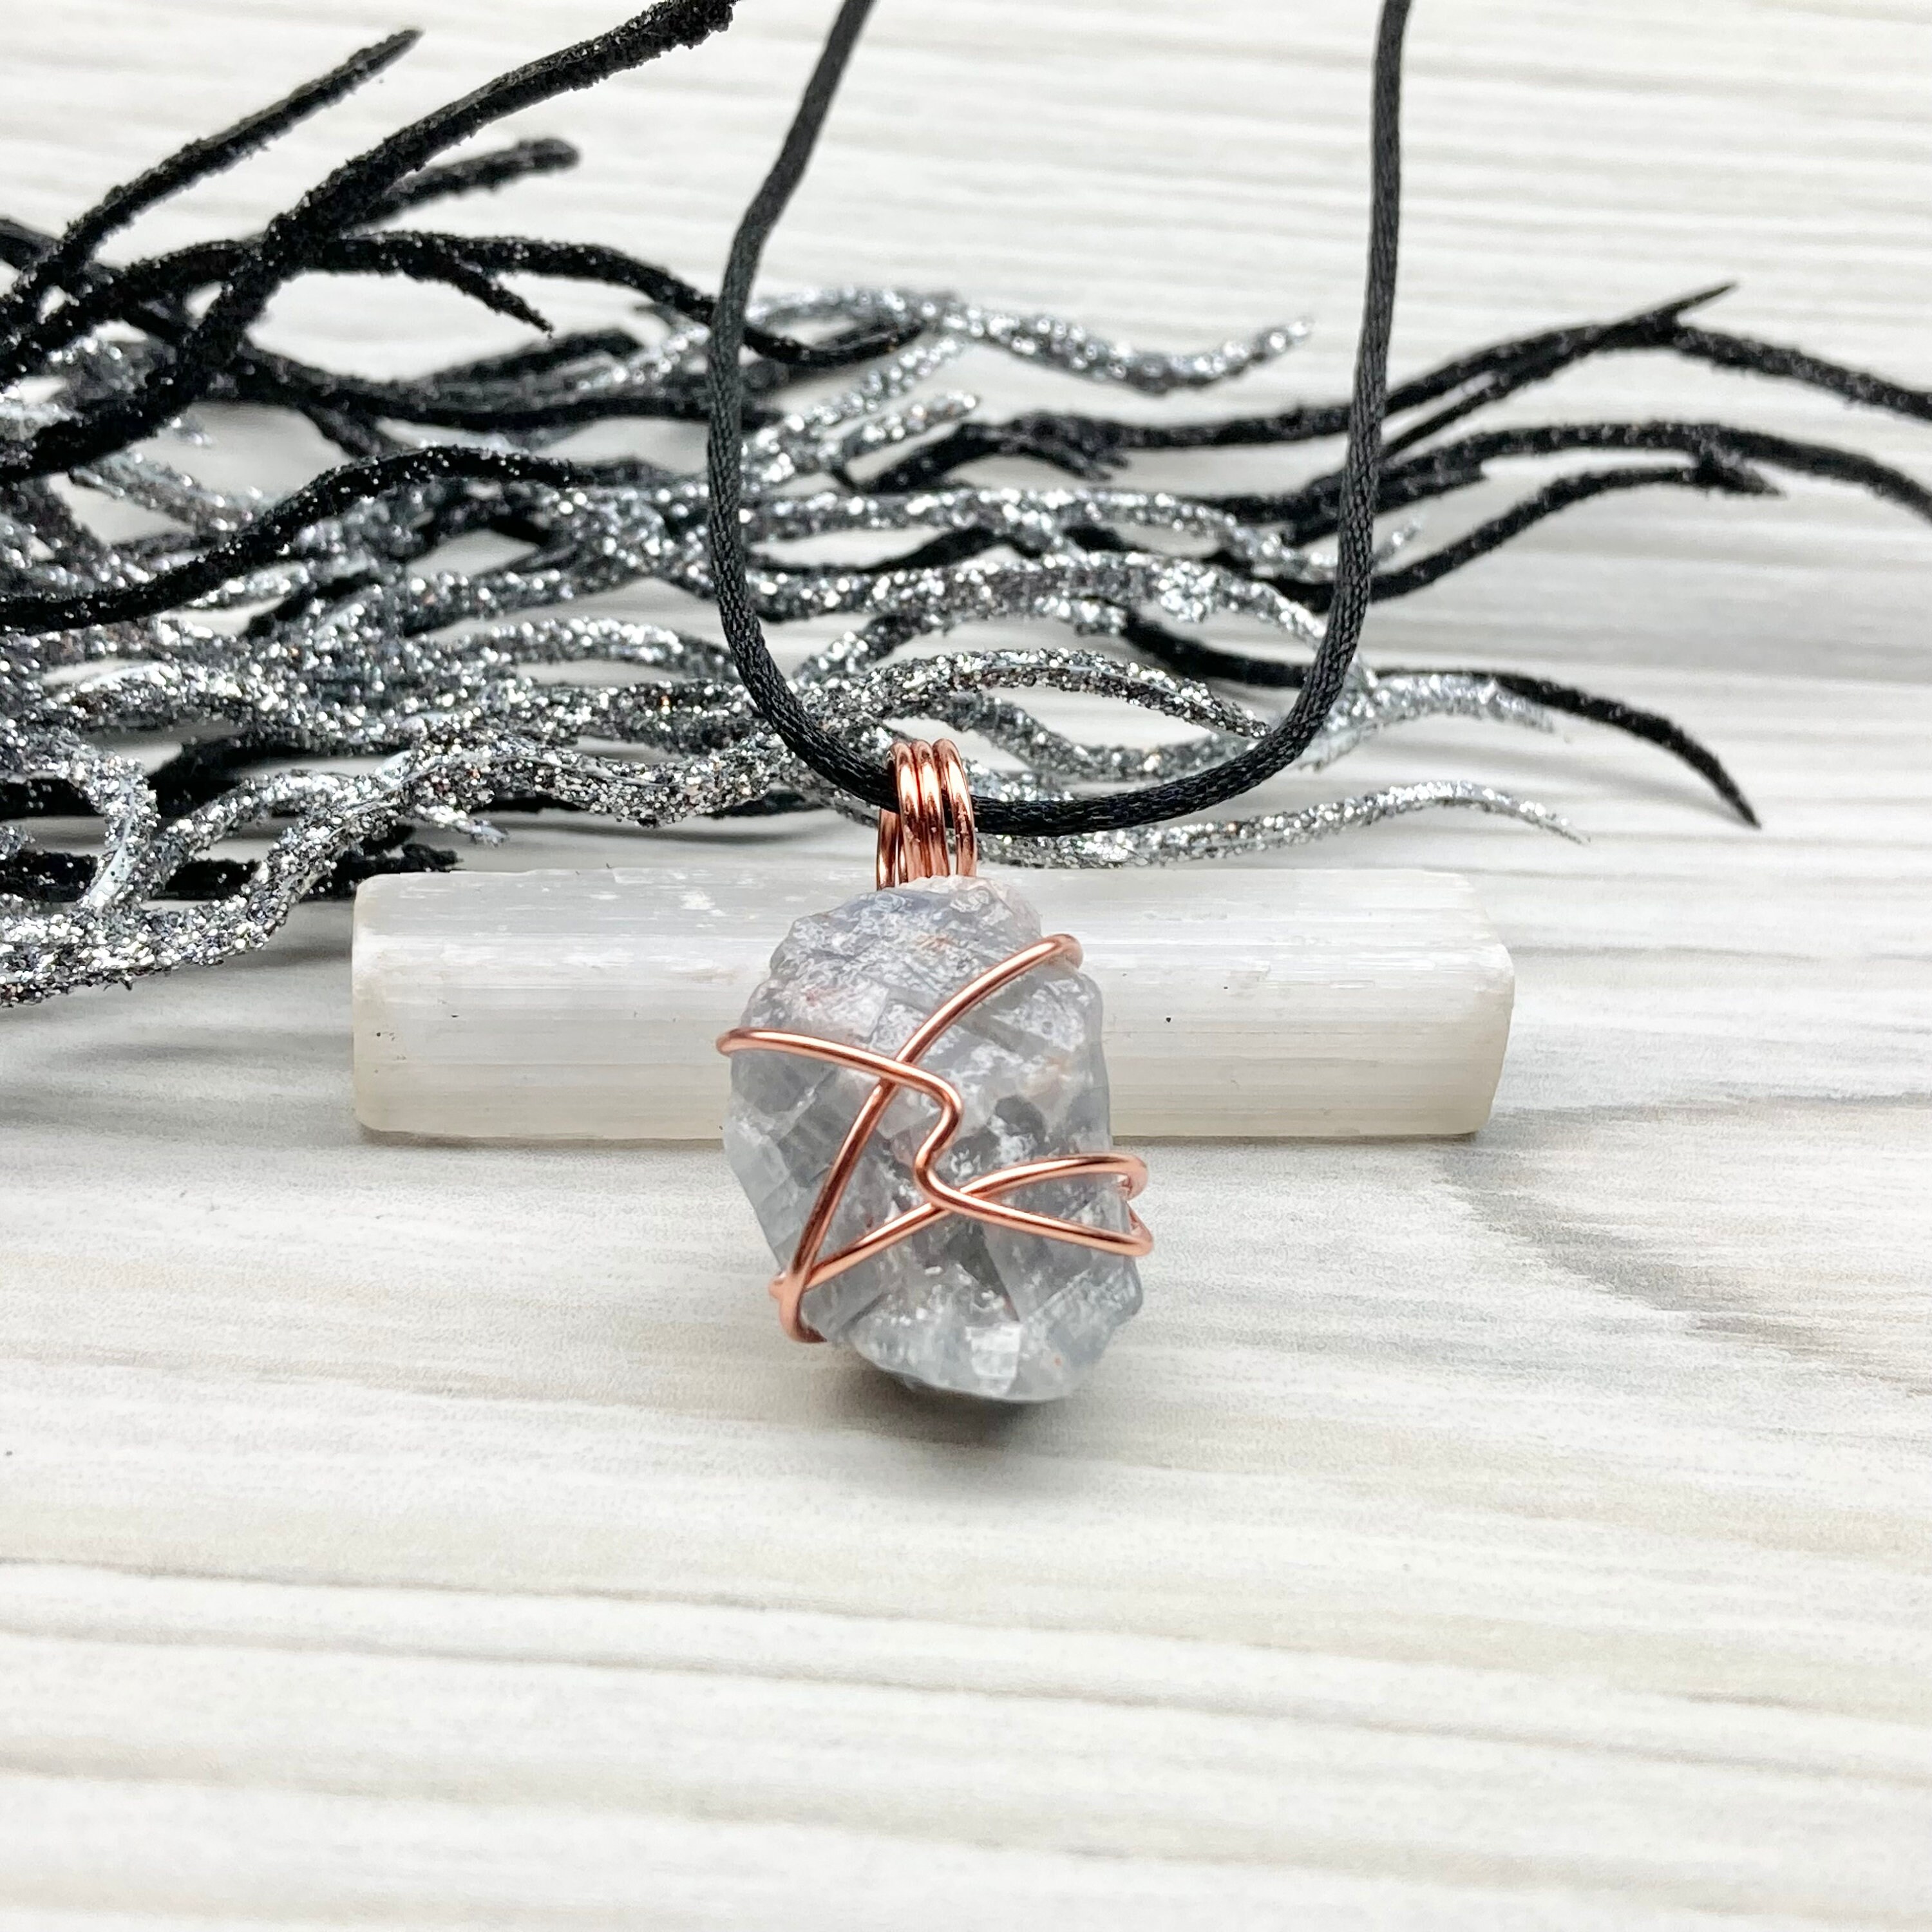 Blue Calcite Necklace, Copper Wrapped Raw Crystal Pendant – solsticewaves